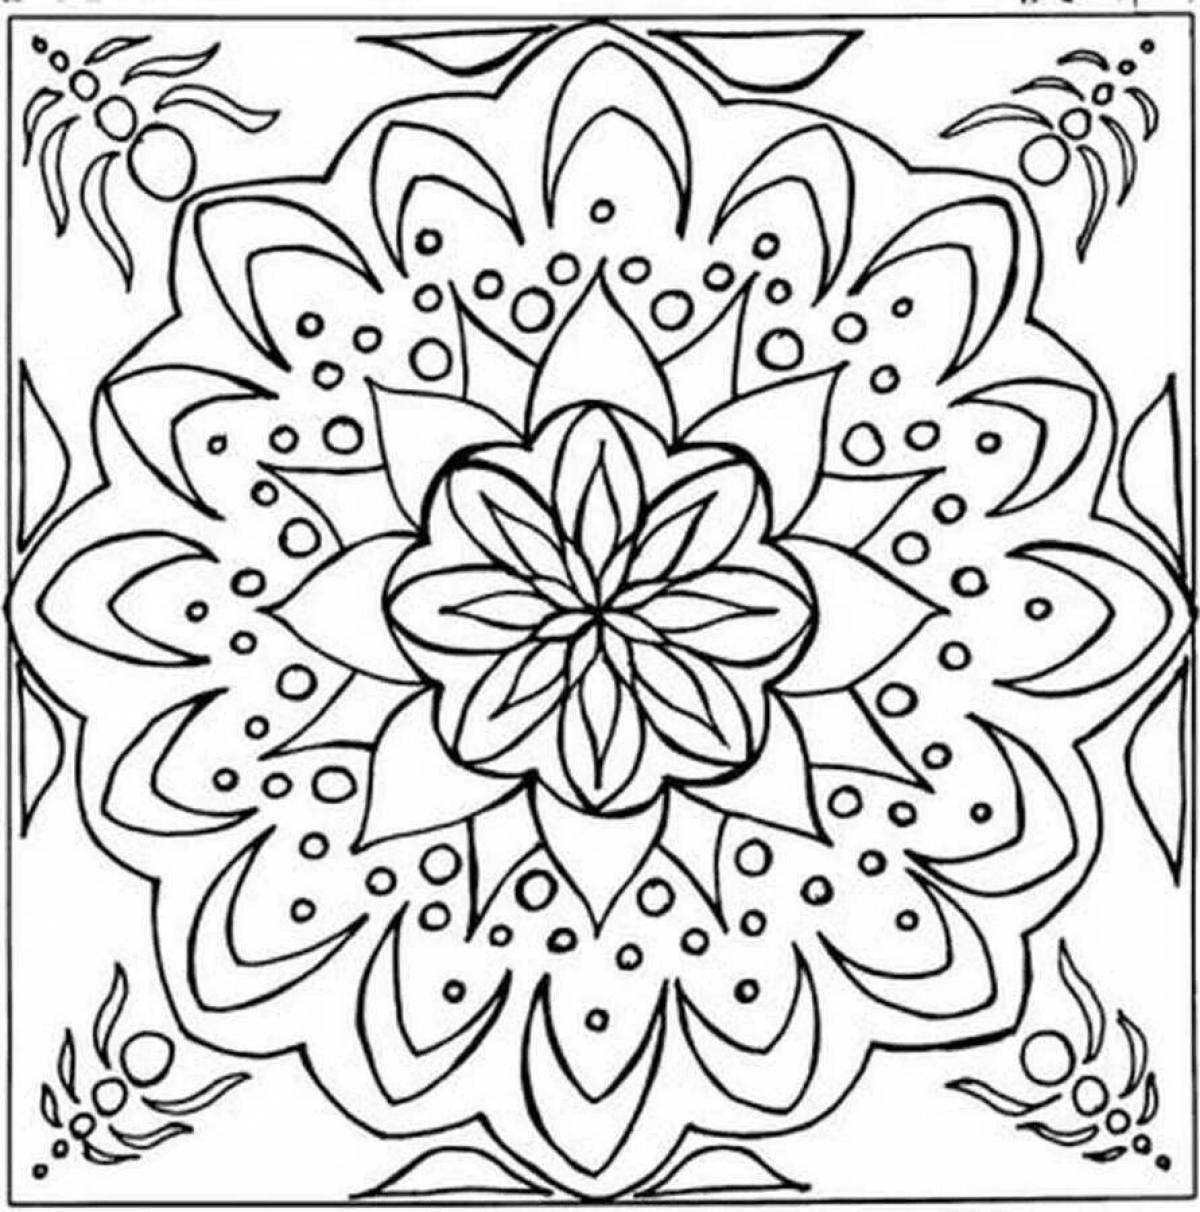 Colorful flower coloring pages